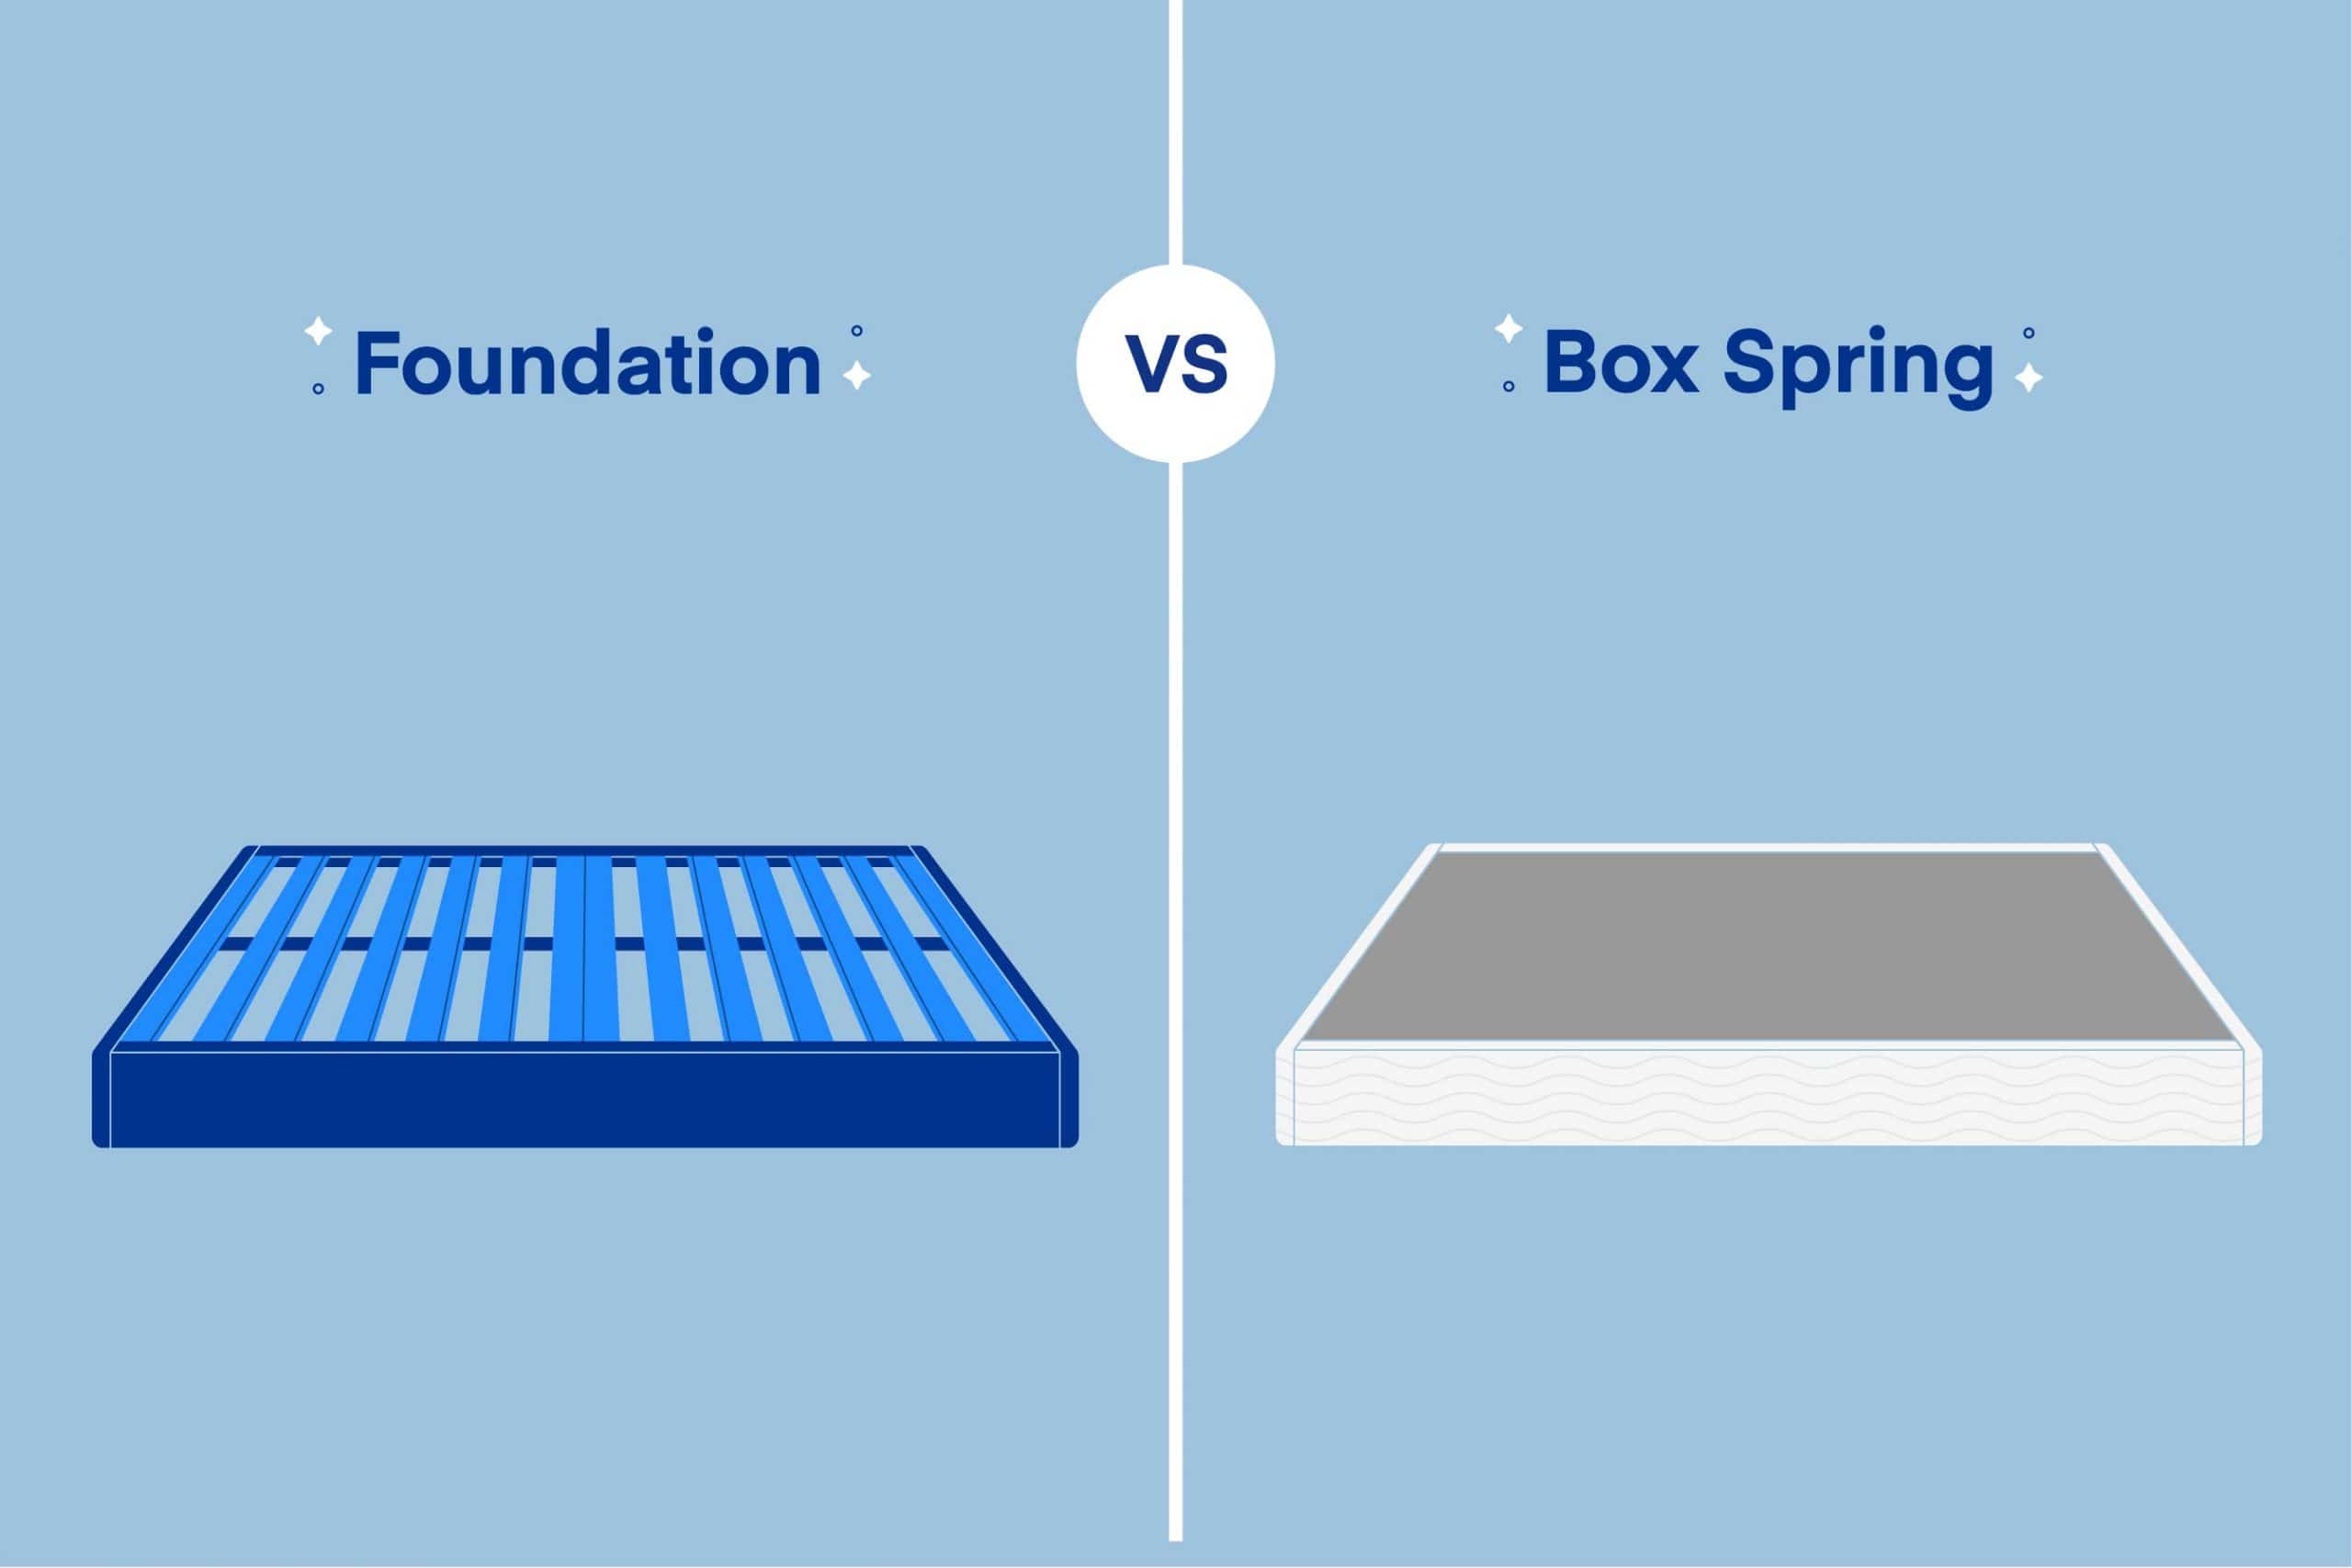 Differences between a Box Spring vs Foundation